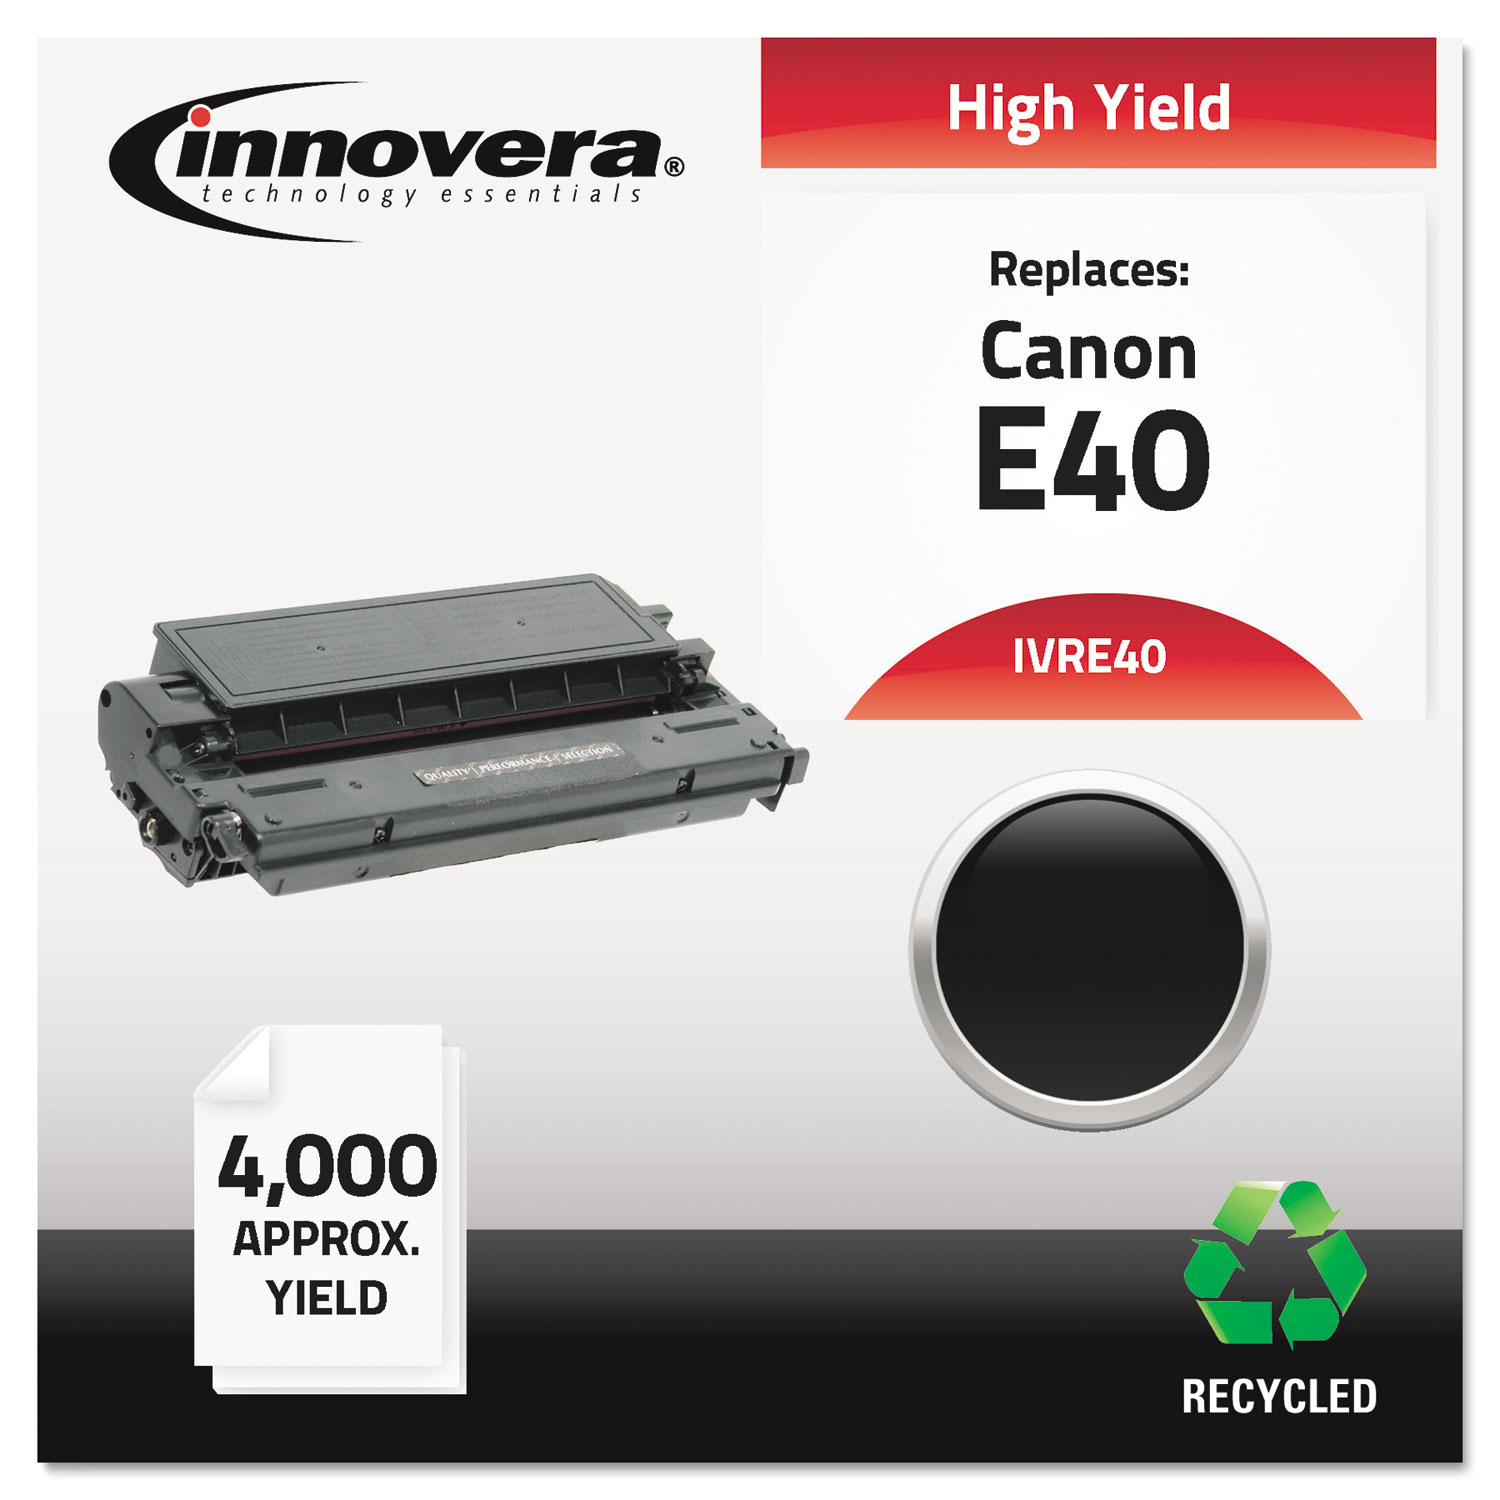  Innovera IVRE40 Remanufactured 1491A002AA (E40) High-Yield Toner, 4000 Page-Yield, Black (IVRE40) 